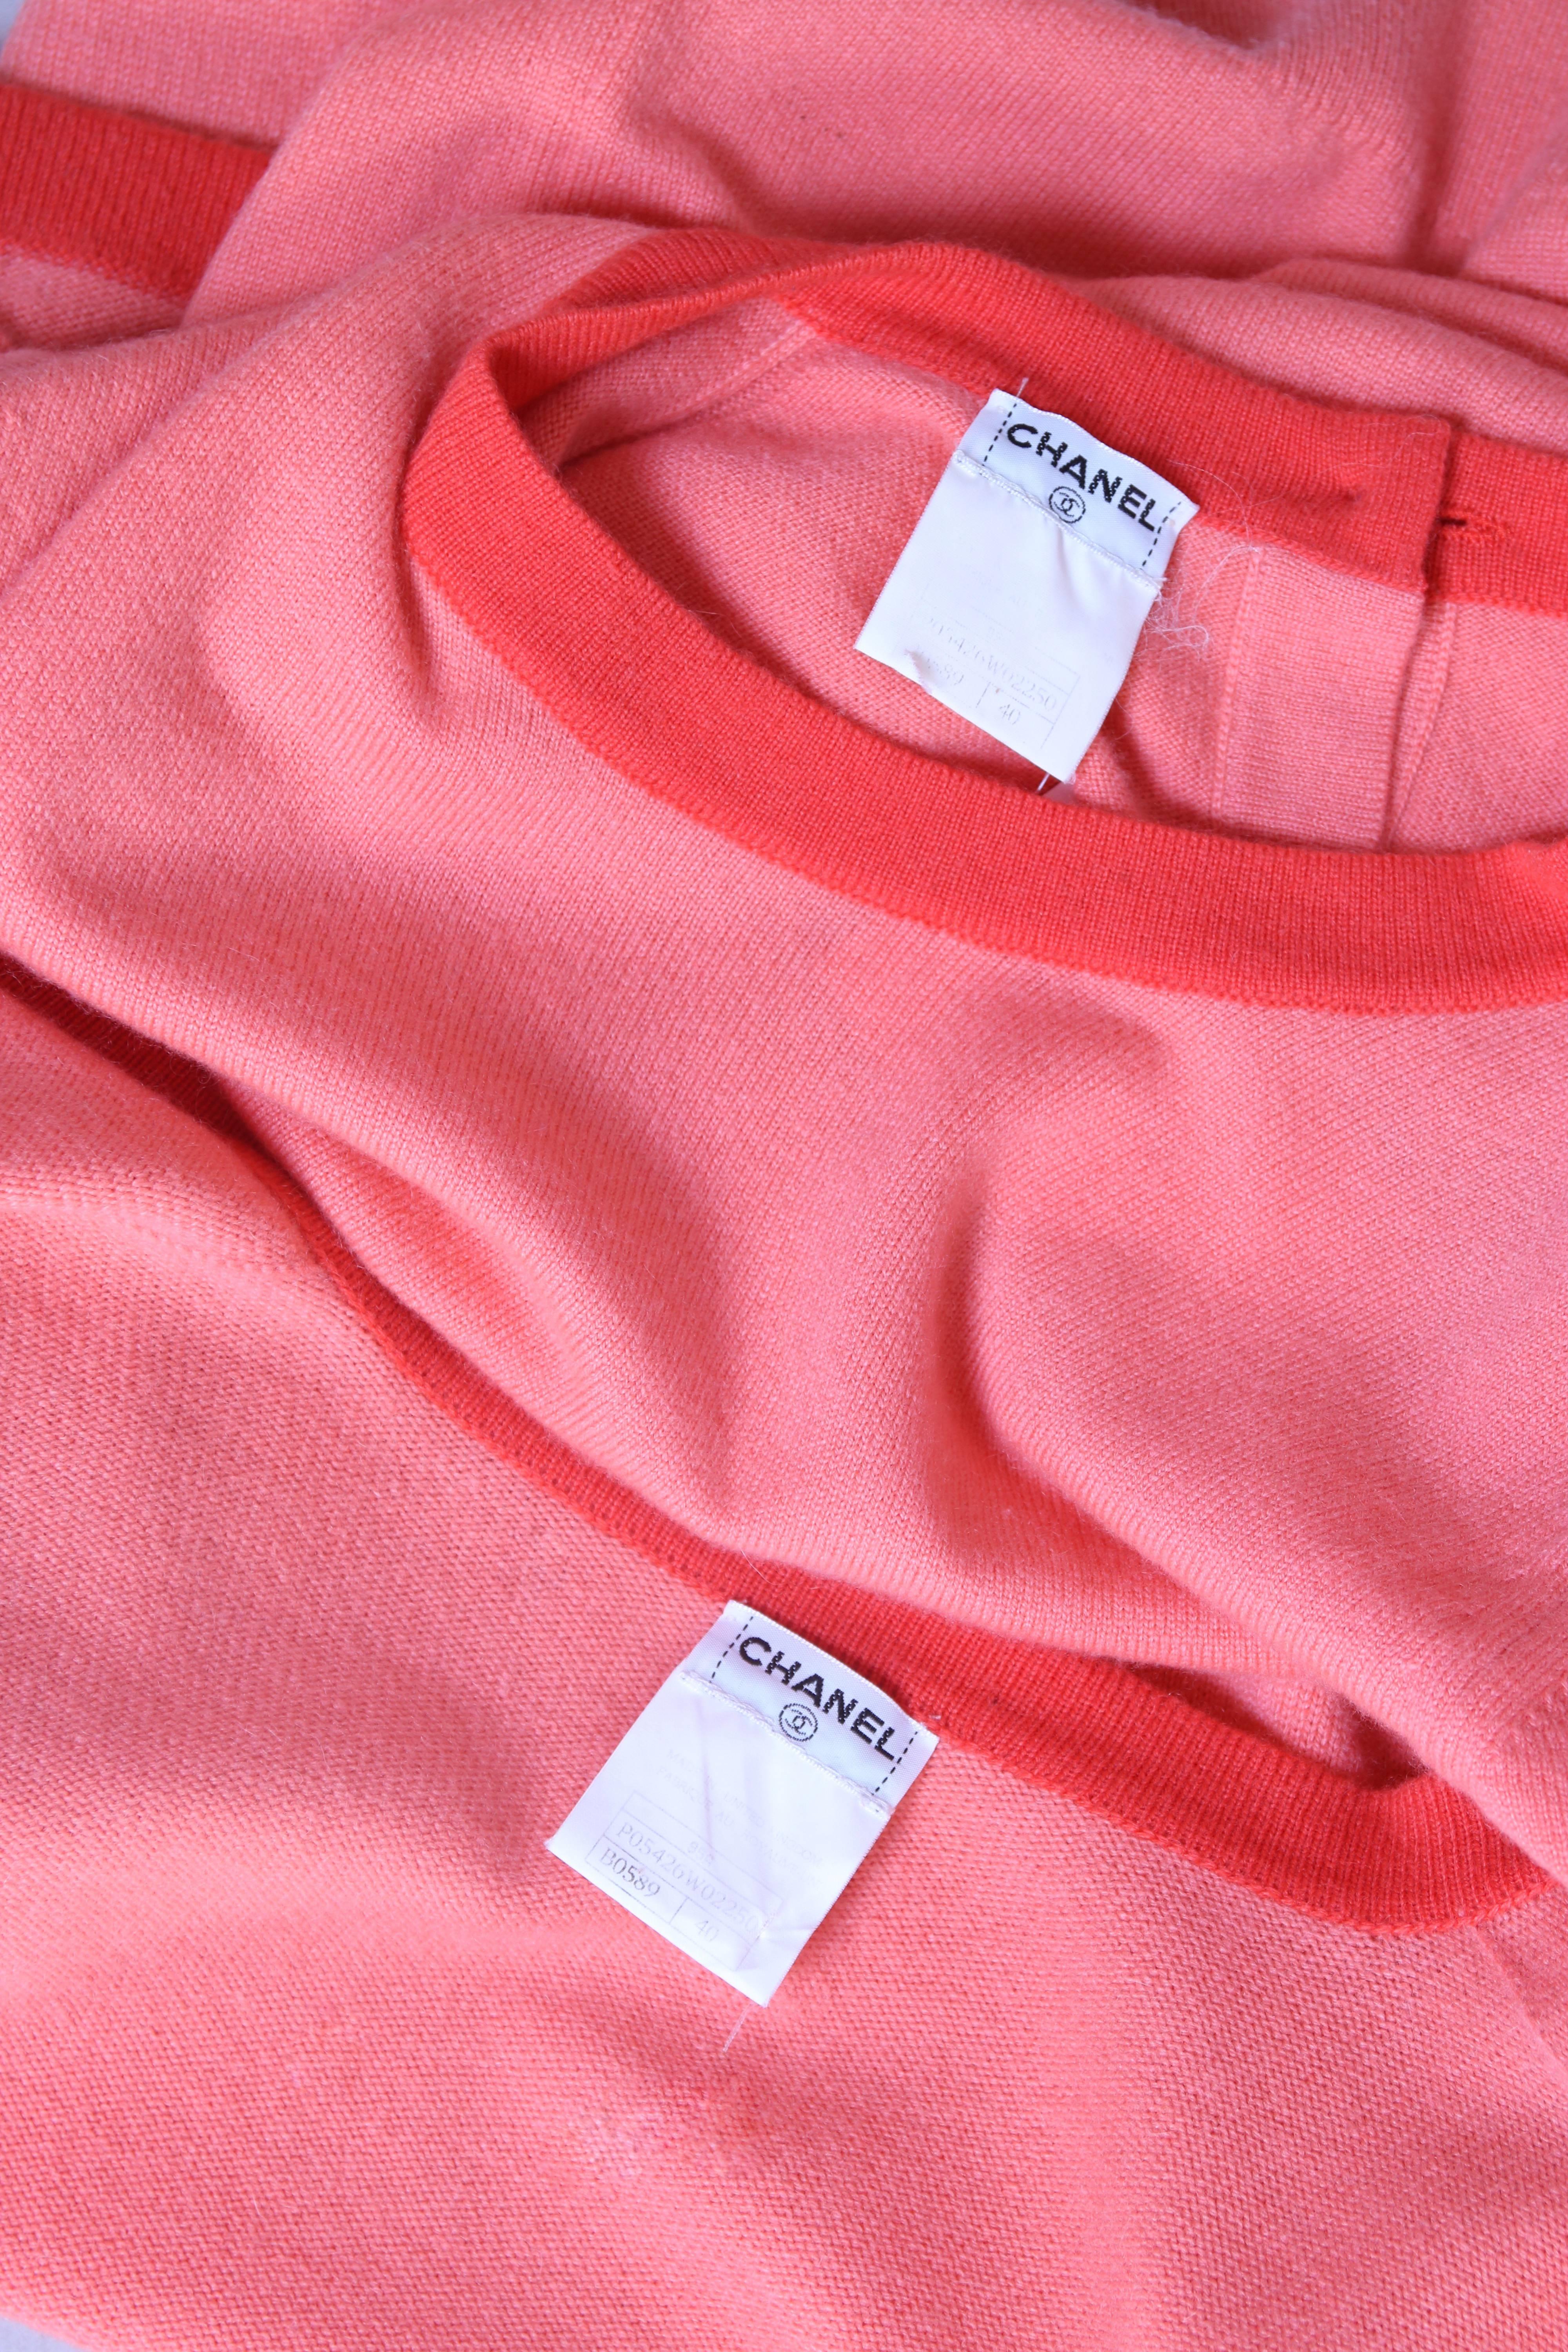 Chanel Pink Cashmere Twin Set w/Chanel Logo buttons 2